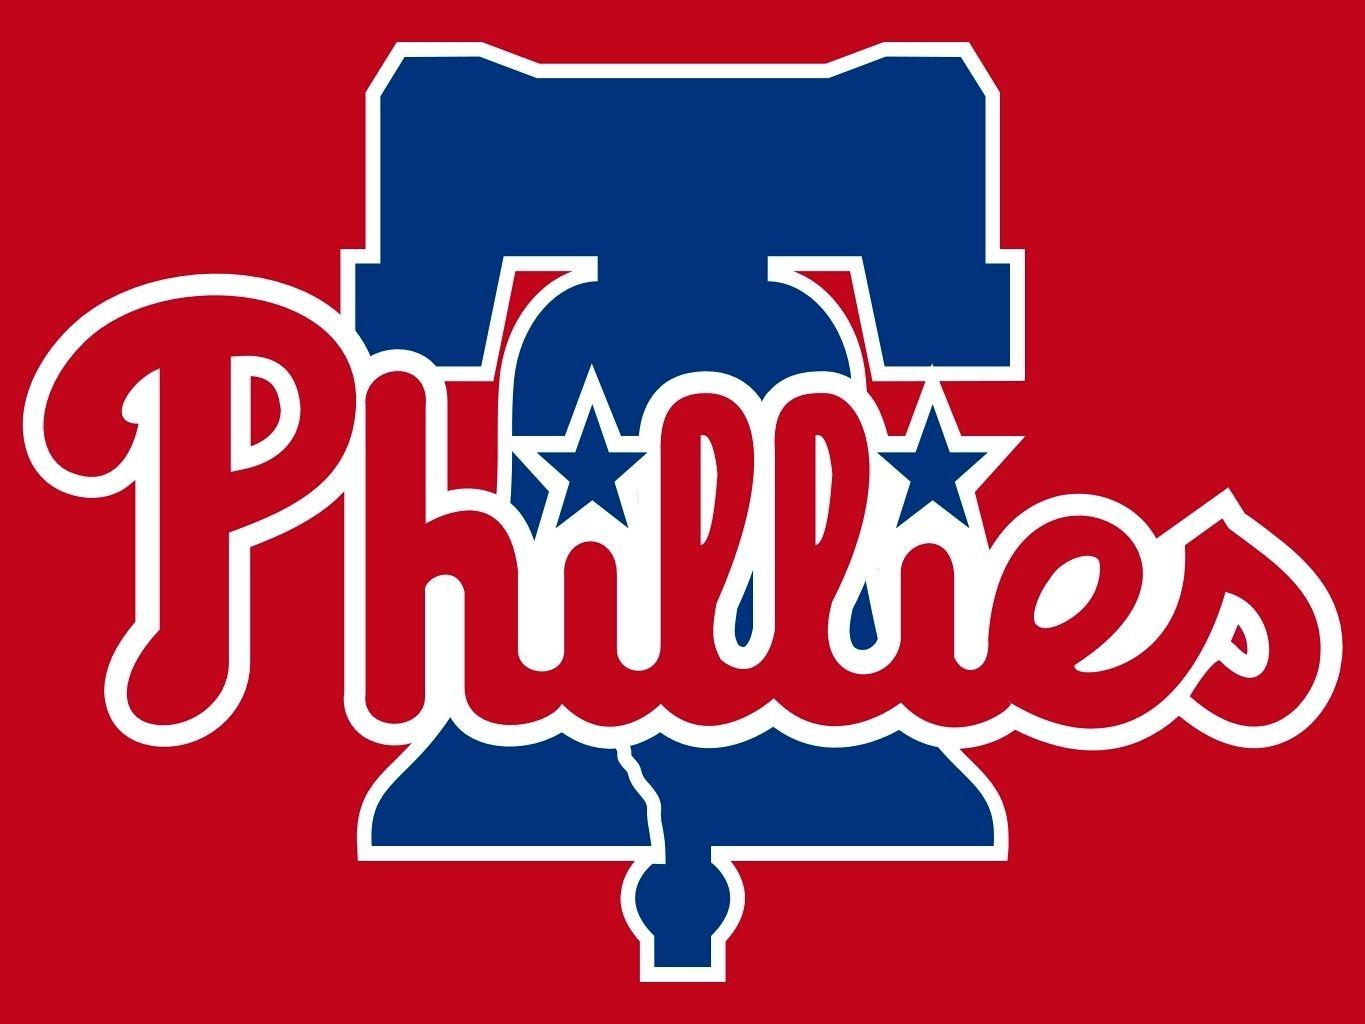 Philadelphia Phillies Team Logo - The Phillies are off to their worst 49-game start since 2002 | The ...